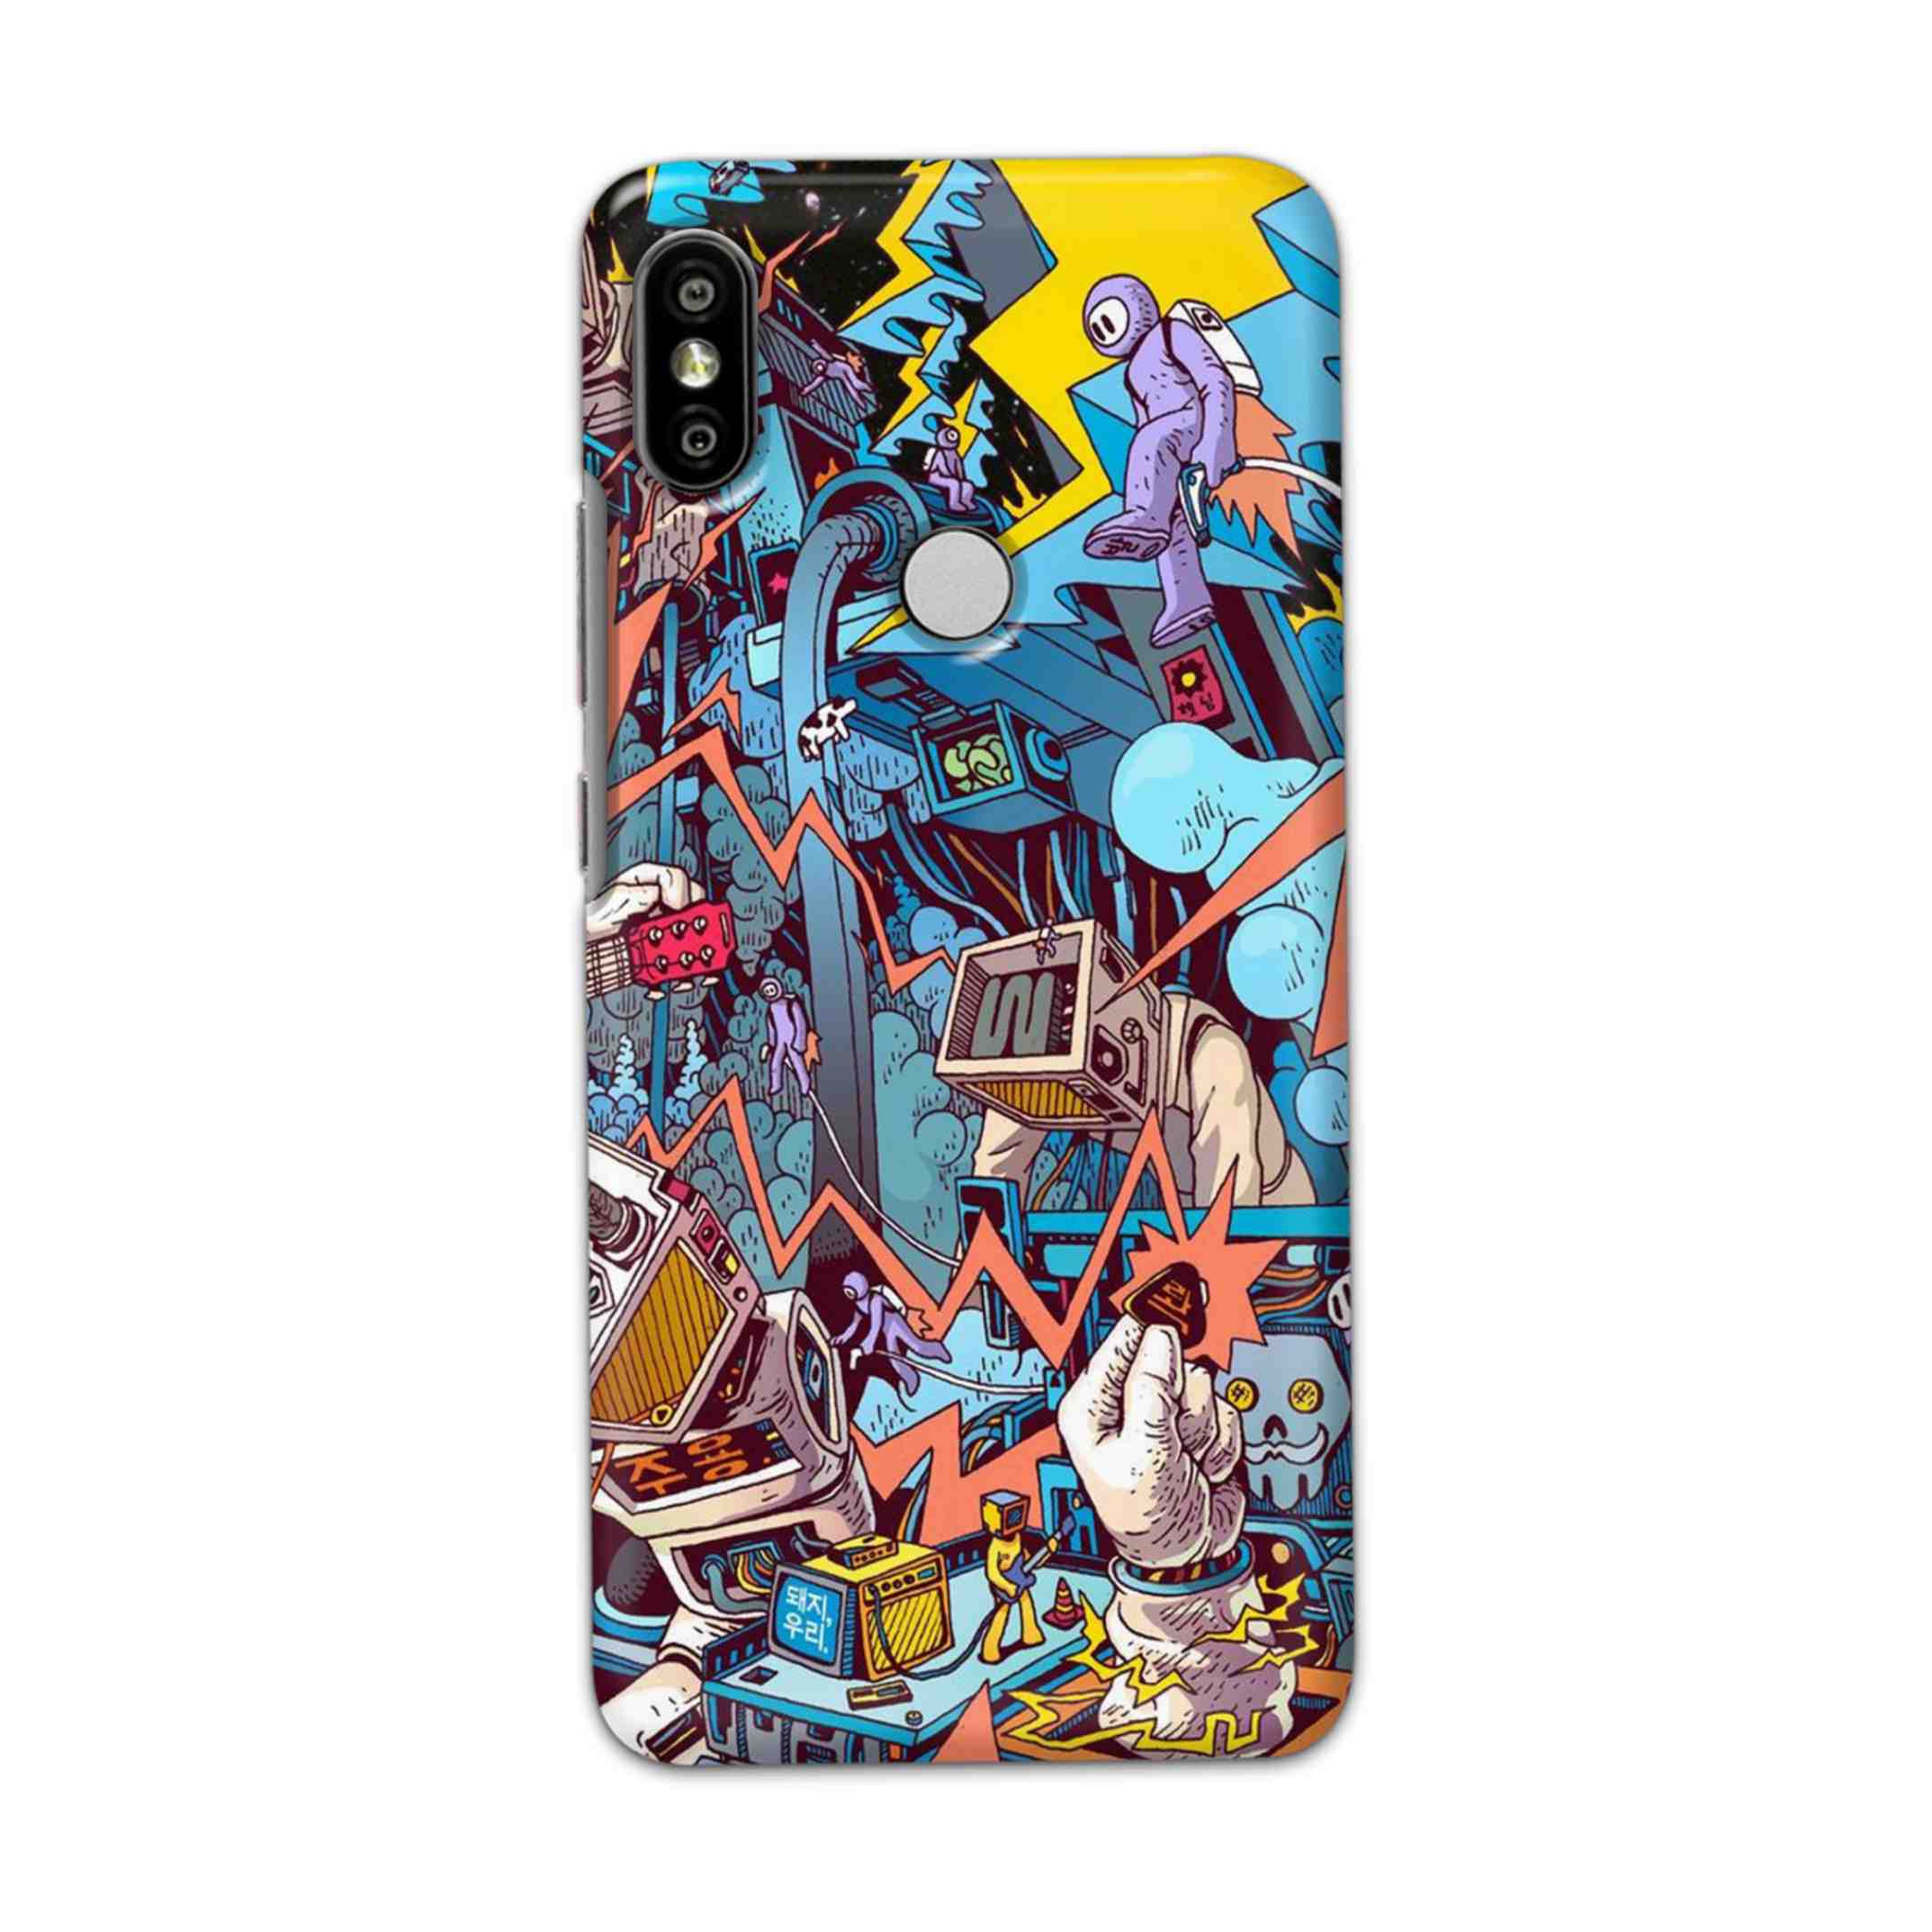 Buy Ofo Panic Hard Back Mobile Phone Case Cover For Redmi S2 / Y2 Online